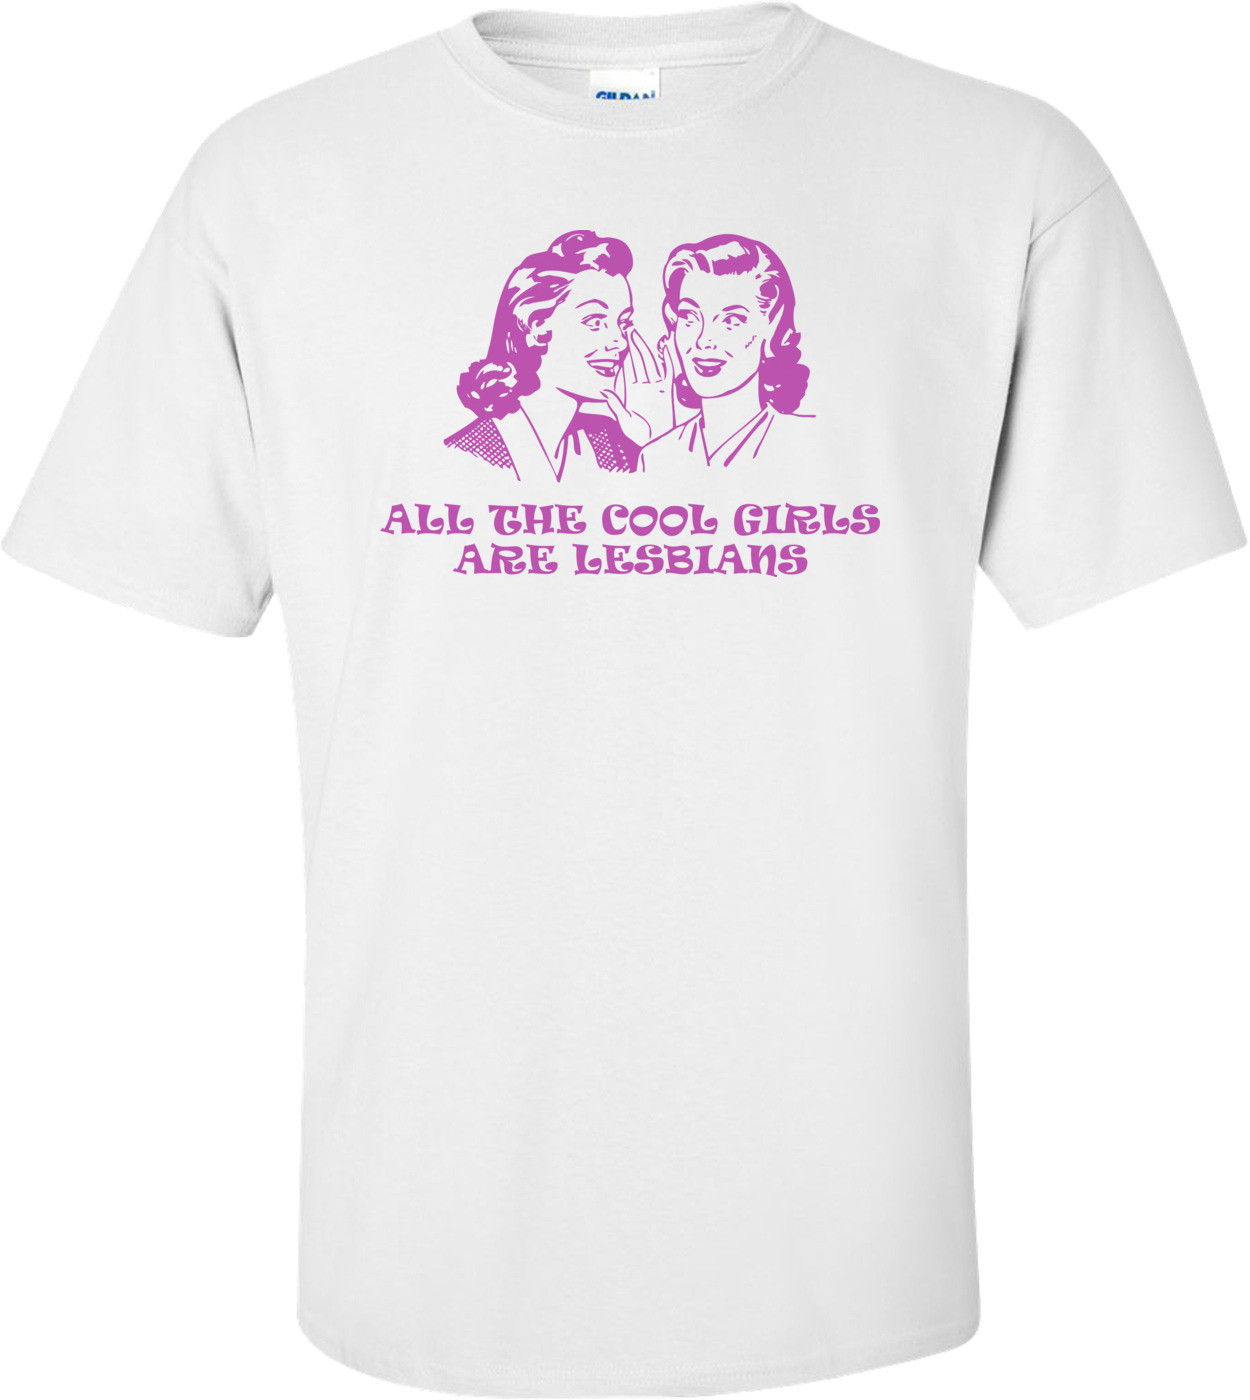 All The Cool Girls Are Lesbians T-shirt